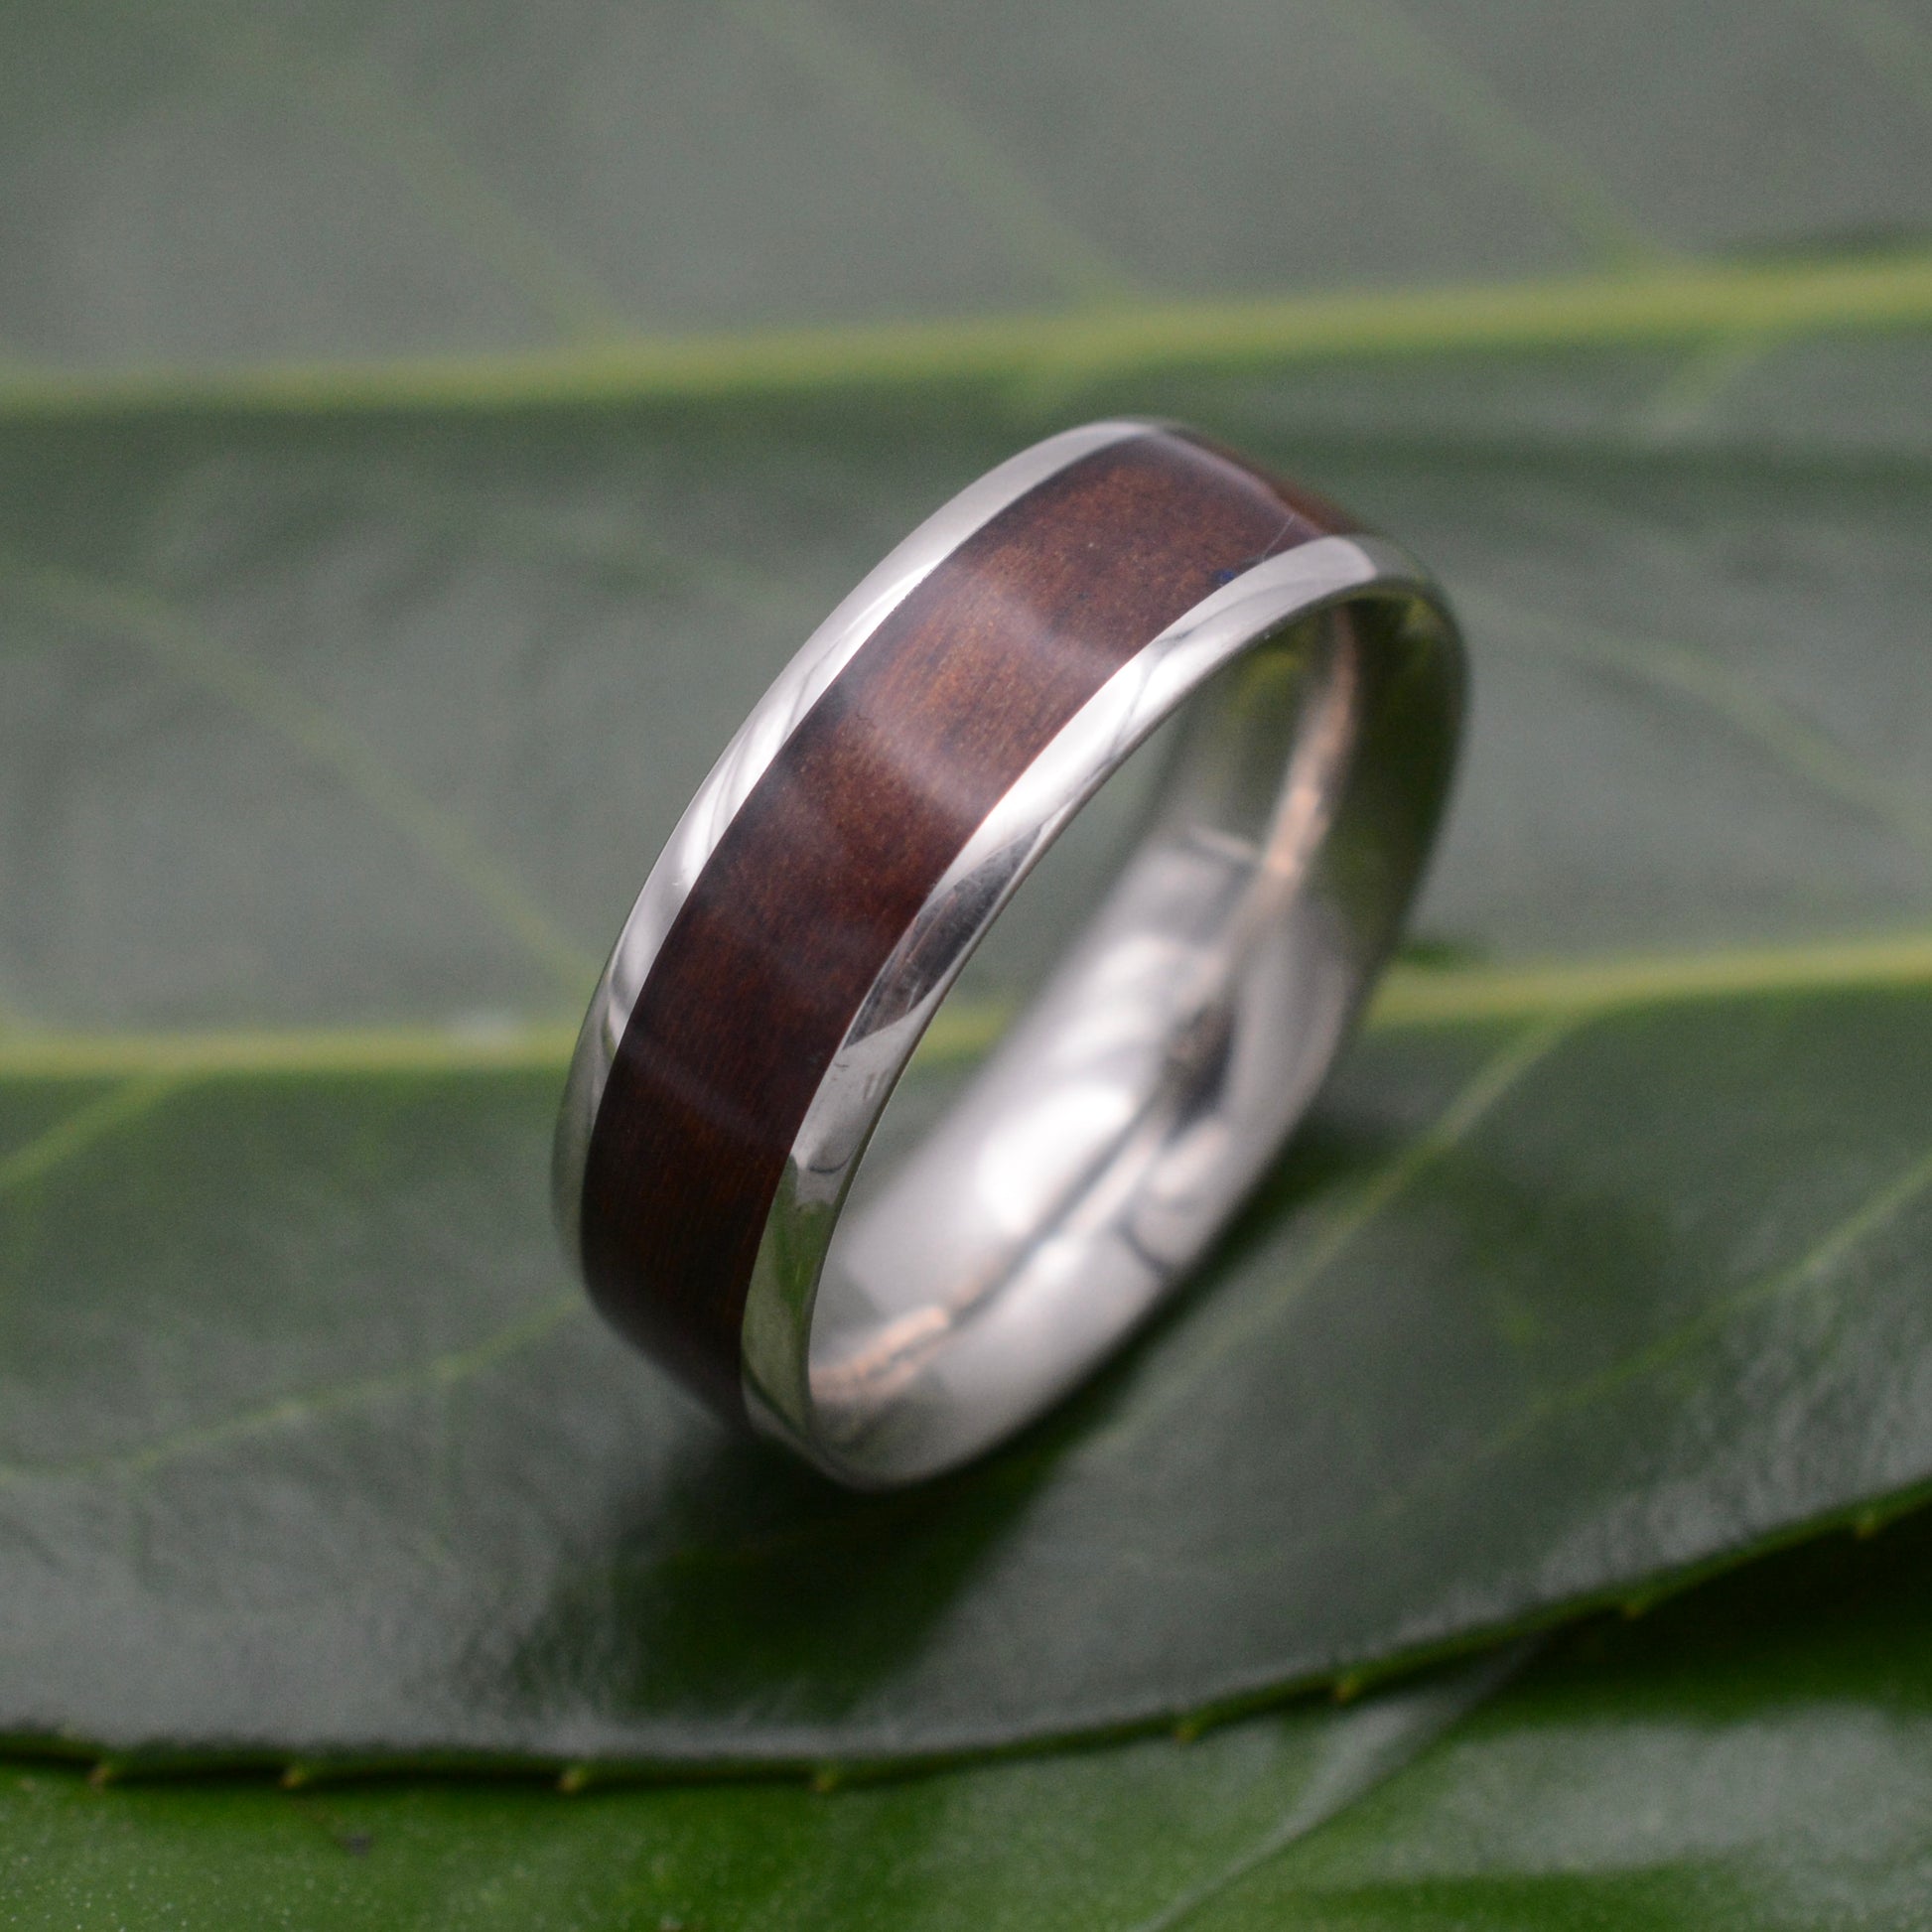 a wedding ring with a wooden inlay on a leaf